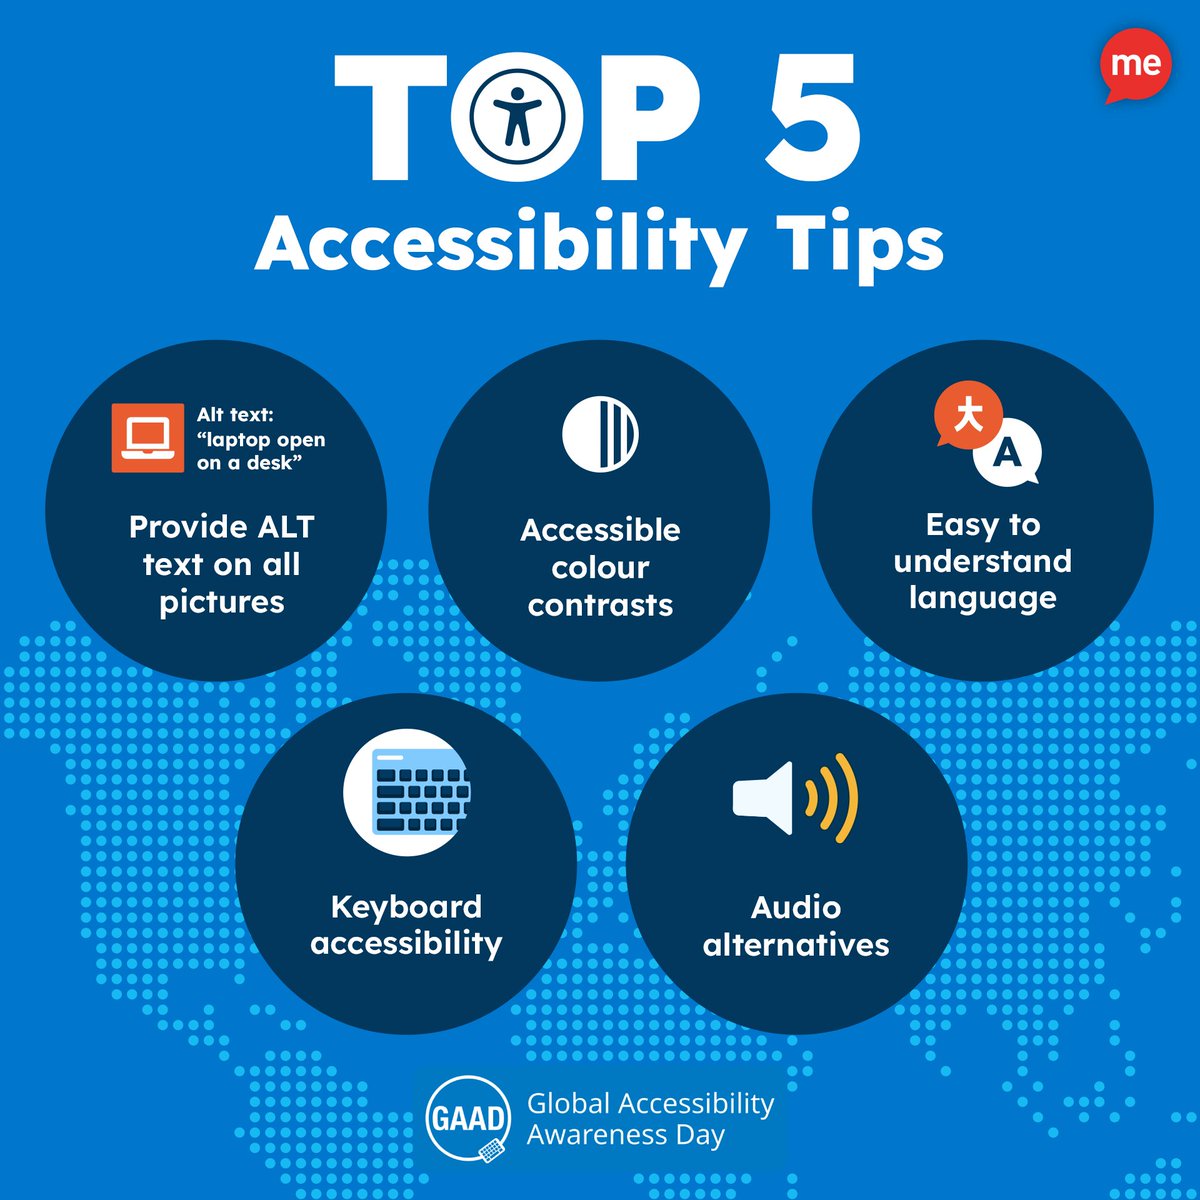 Today, #GlobalAccessibilityAwarenessDay, we’re working with @reciteme to share #accessibility tips. Our top 3: ⭐Provide ALT text on all pictures ⭐Use accessible colour contrasts ⭐Use simple language & audio alternatives. See the full guide.👇 downloads.reciteme.com/gaad-inclusive… #GAAD